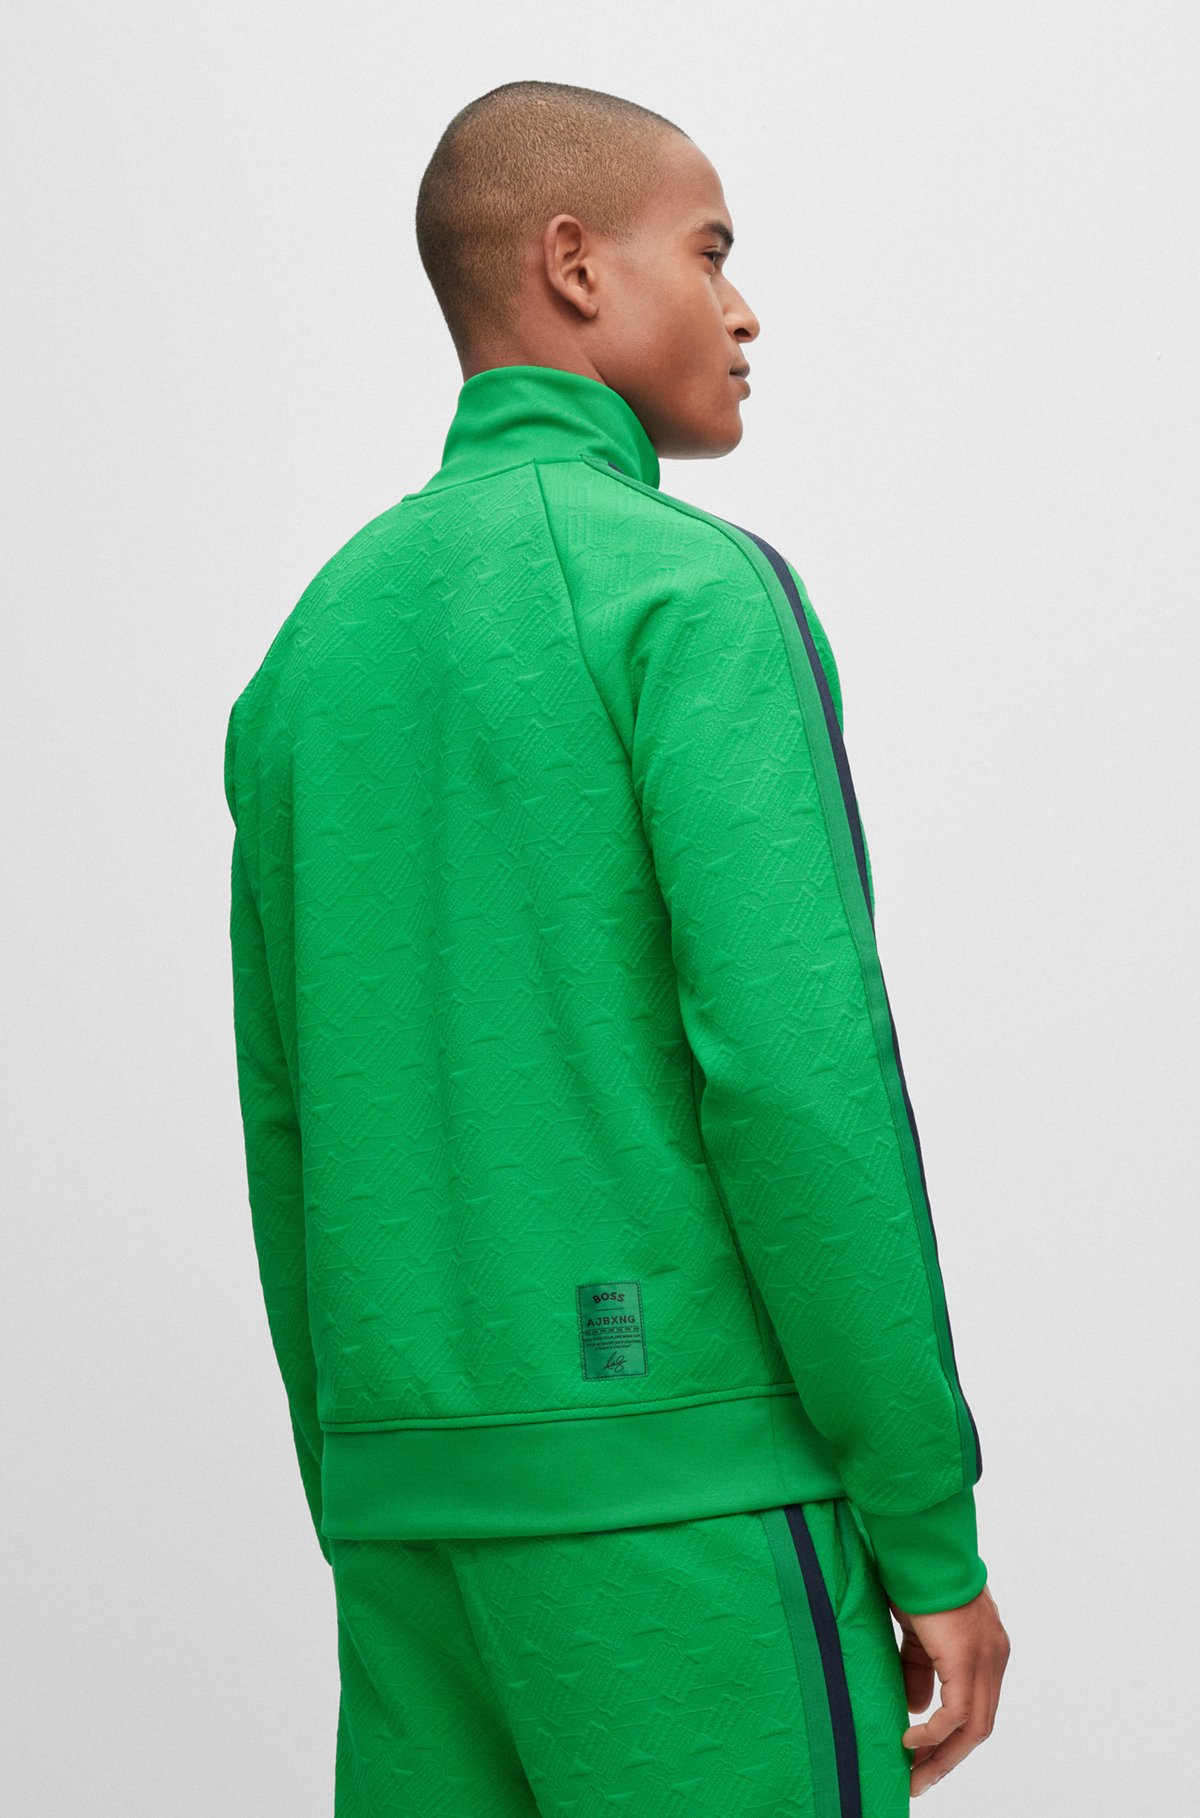 BOSS - BOSS x AJBXNG relaxed-fit zip-up sweatshirt with all-over 